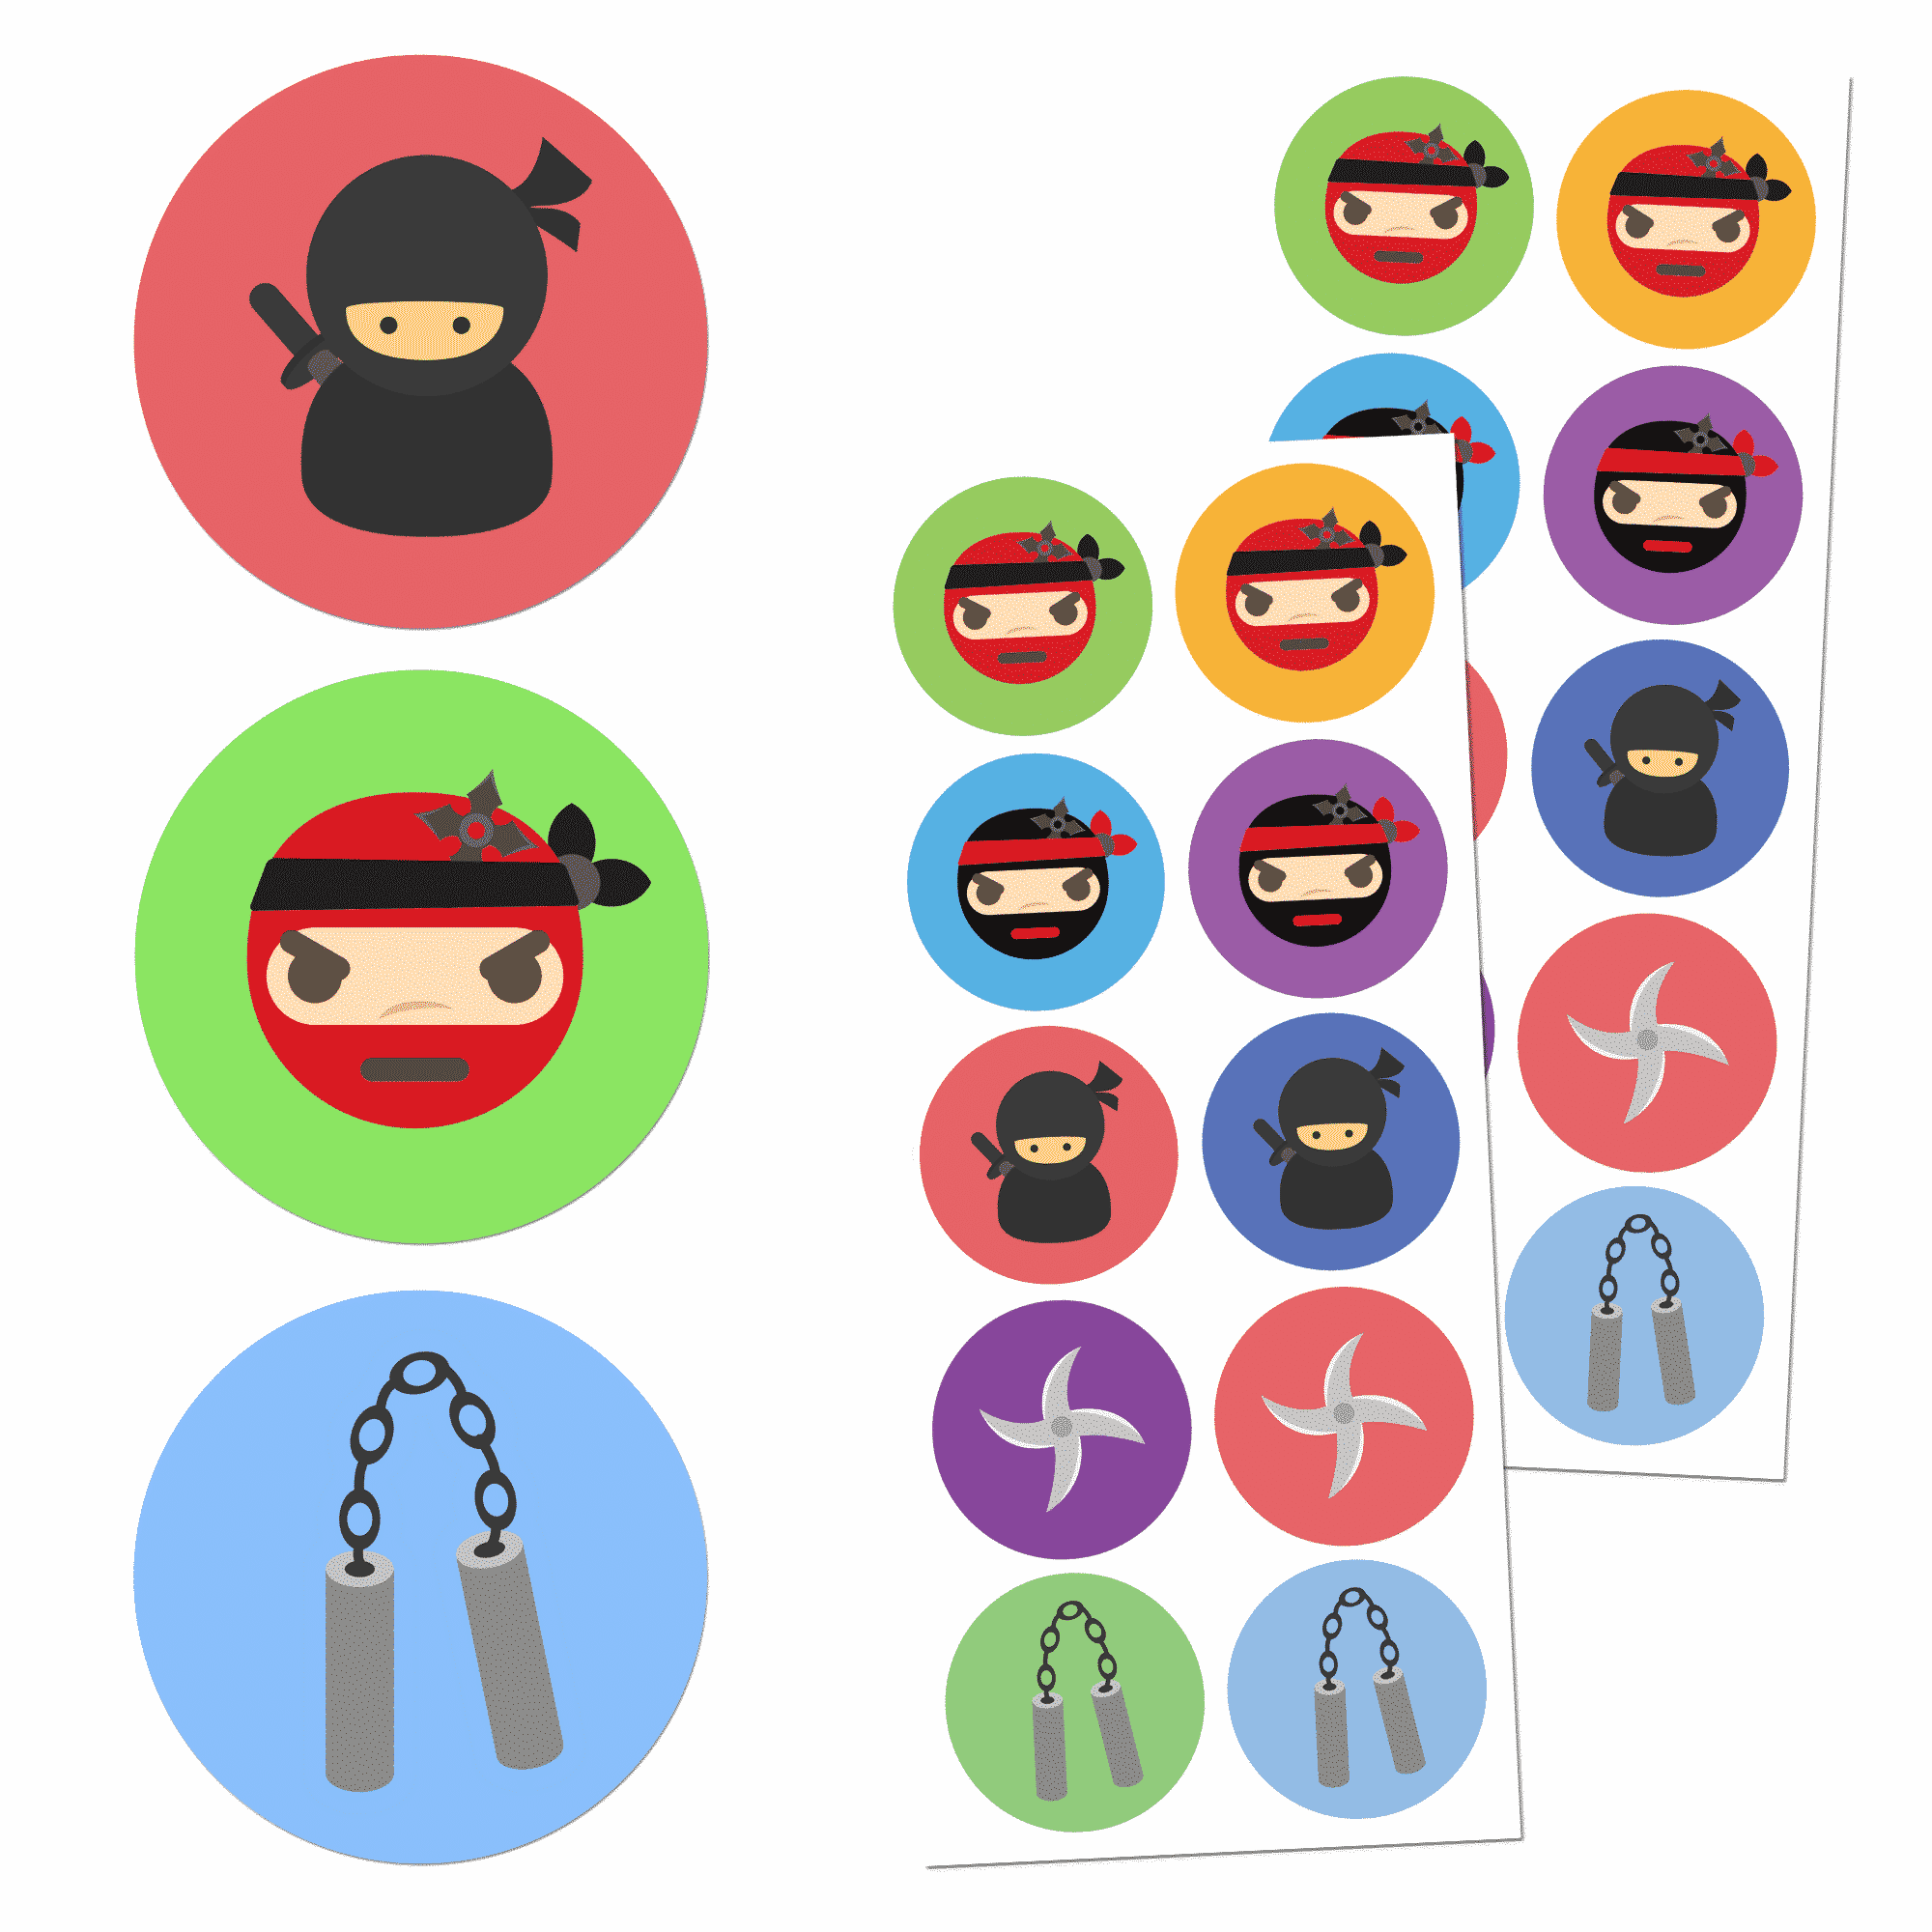 Ninja Sticker Roll 100 stickers per roll by Party Favors 